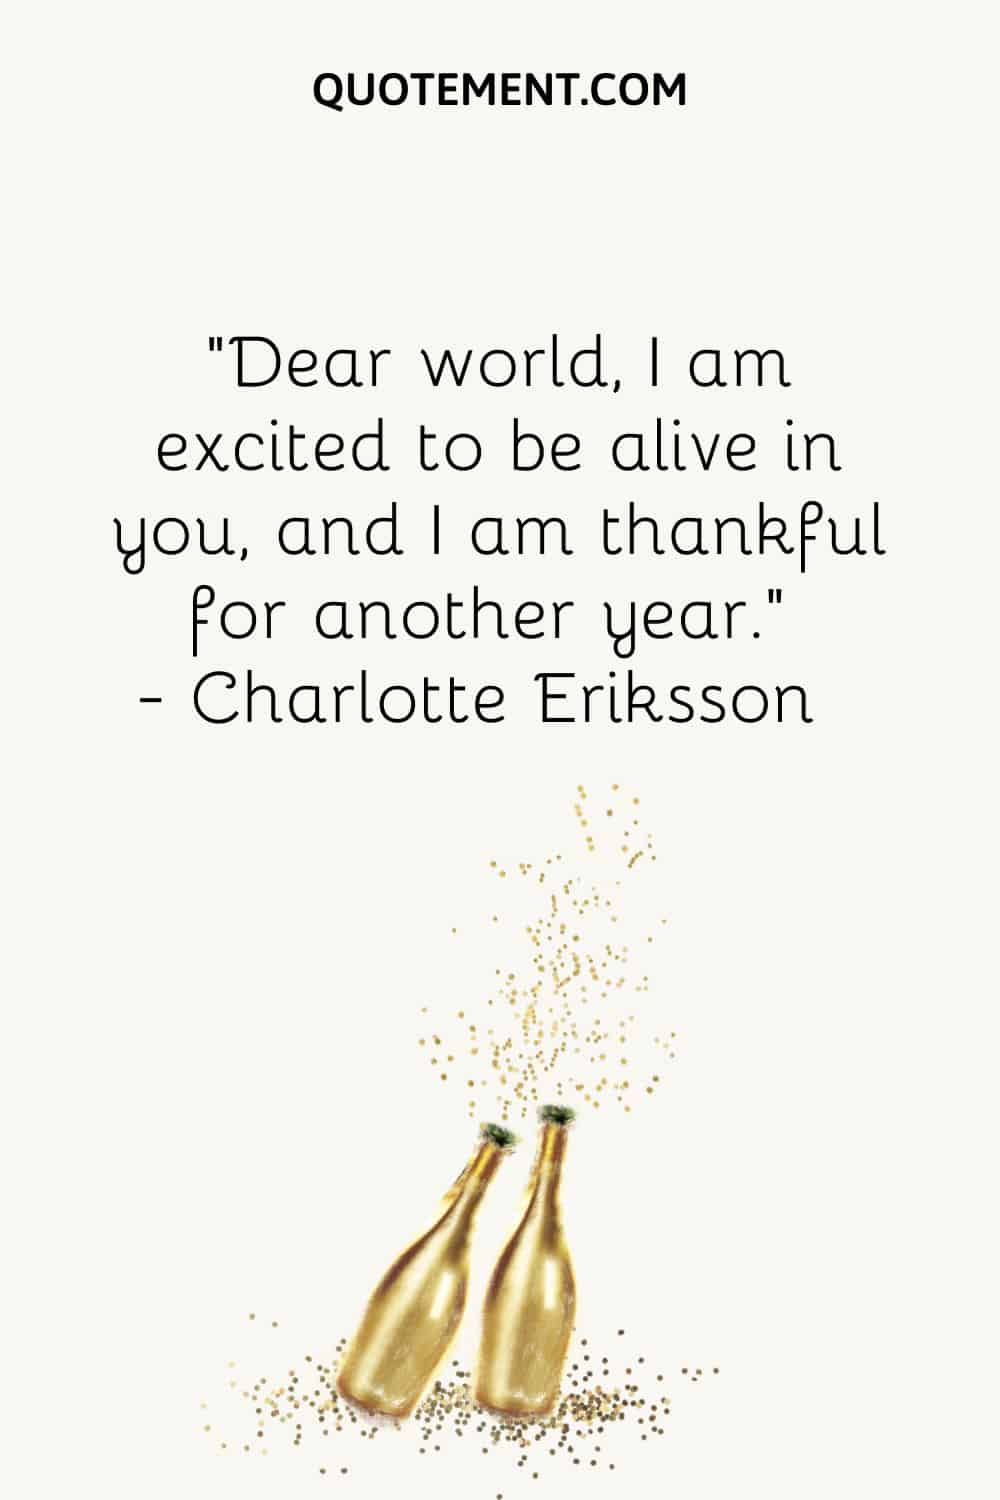 golden champagne glasses image representing inspirational quote for the year's end